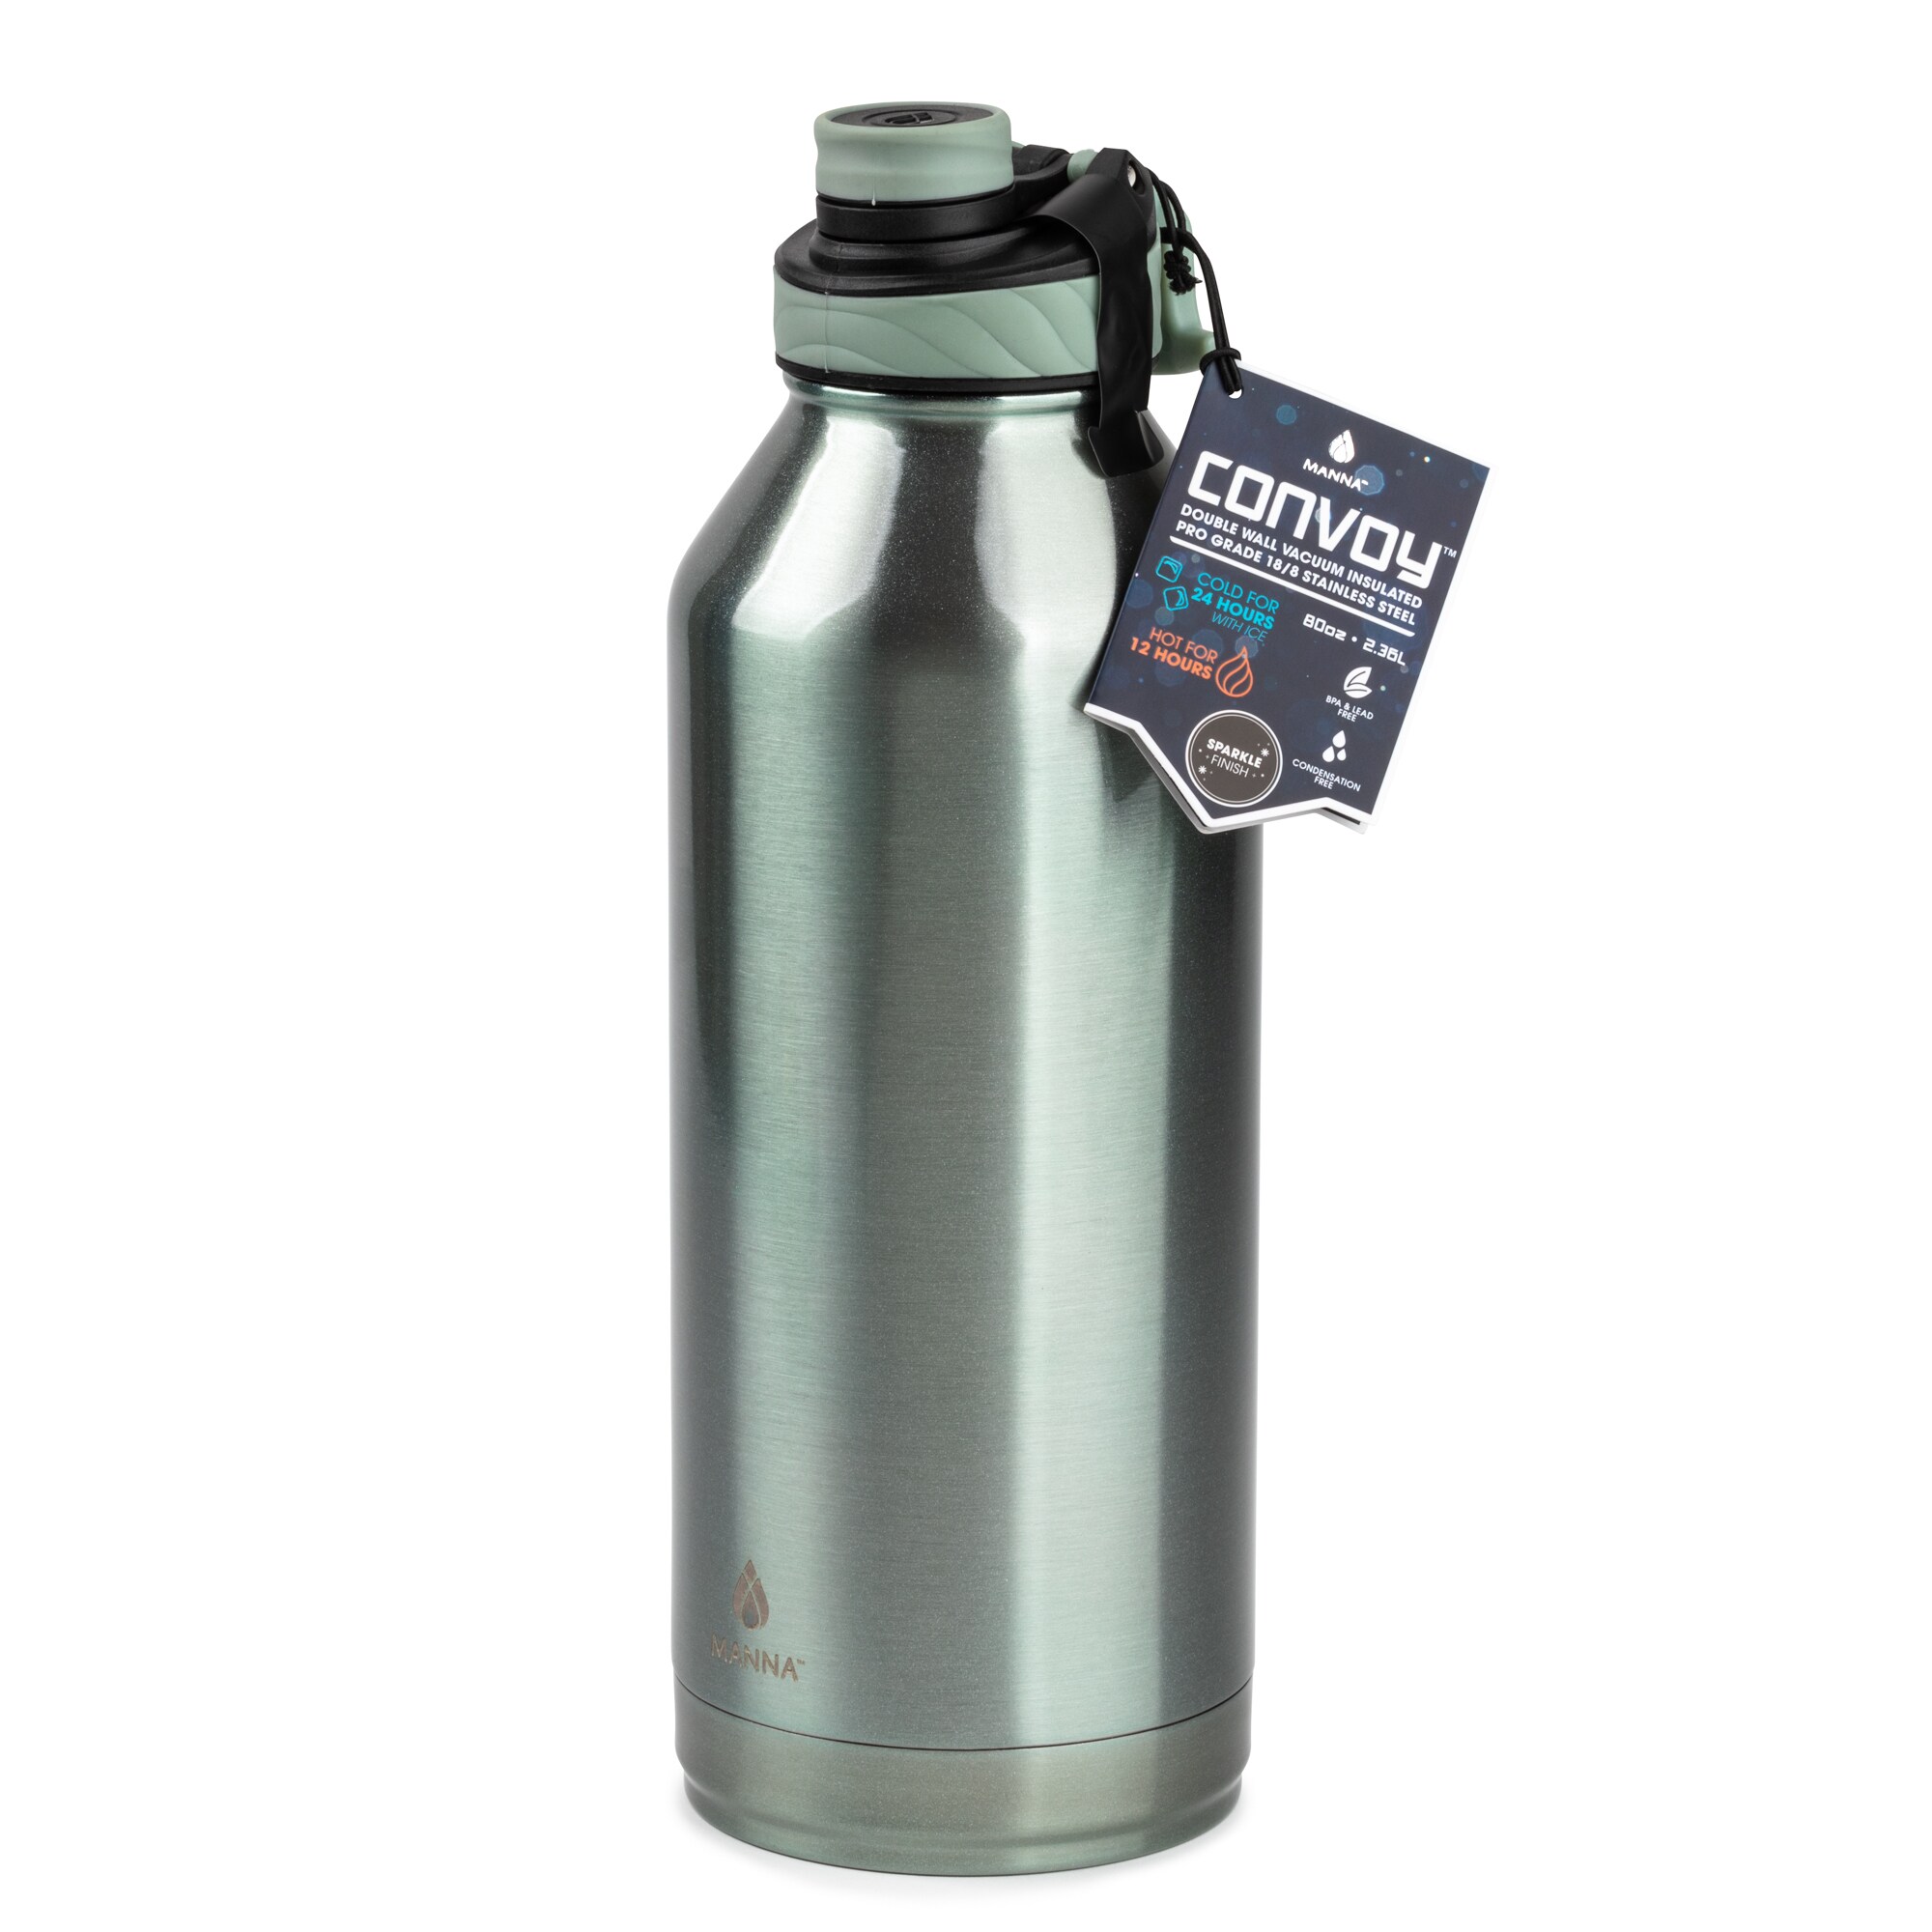 24 Hours Cold / 12 Hours Hot 22 oz. Insulated Stainless Steel Water Bottle Vacuum Double Wall Sports Water Bottle REVIVE 